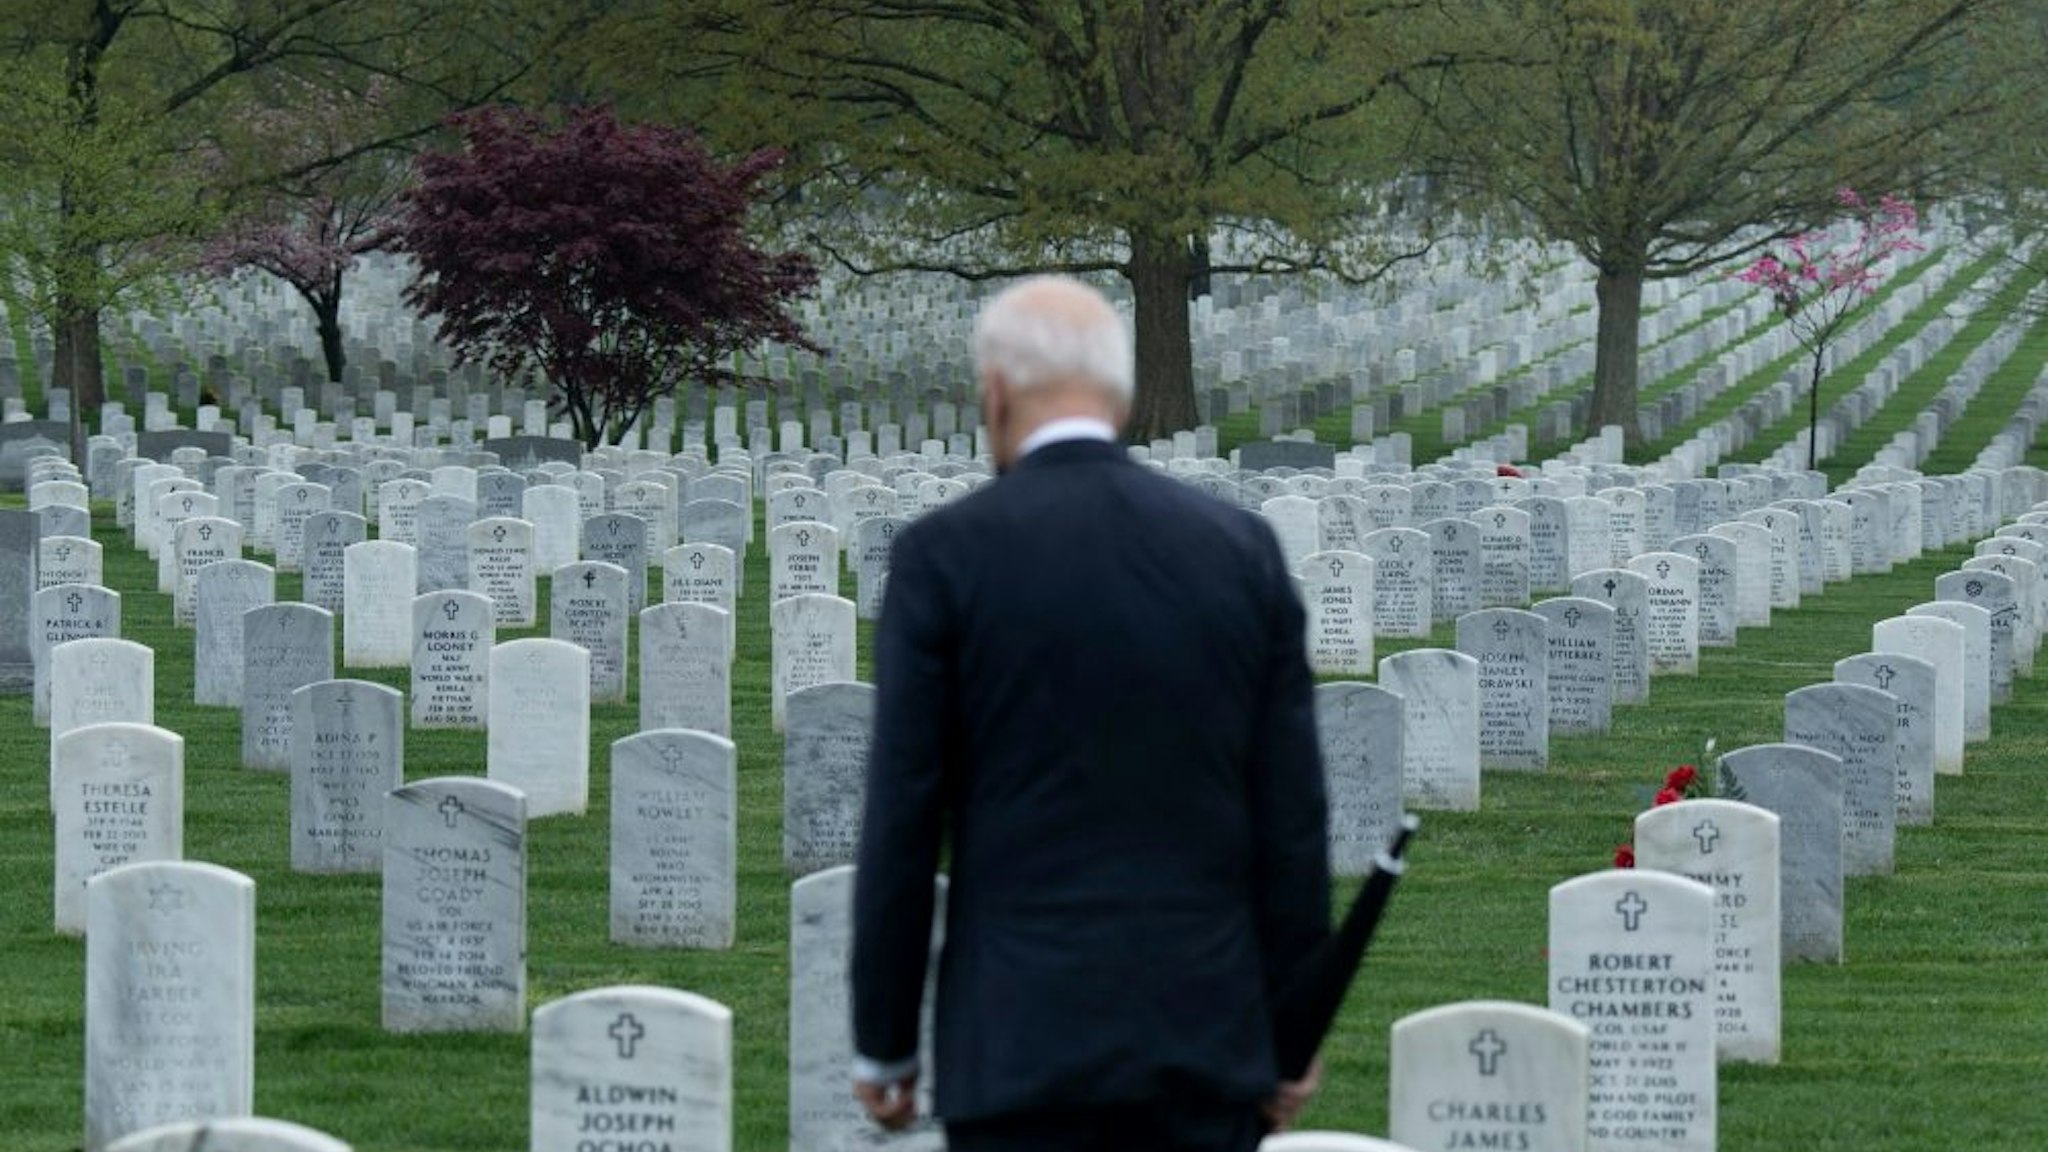 TOPSHOT - US President Joe Biden walks through Arlington National cemetary to honor fallen veterans of the Afghan conflict in Arlington, Virginia on April 14, 2021. - President Joe Biden announced it's "time to end" America's longest war with the unconditional withdrawal of troops from Afghanistan, where they have spent two decades in a bloody, largely fruitless battle against the Taliban.